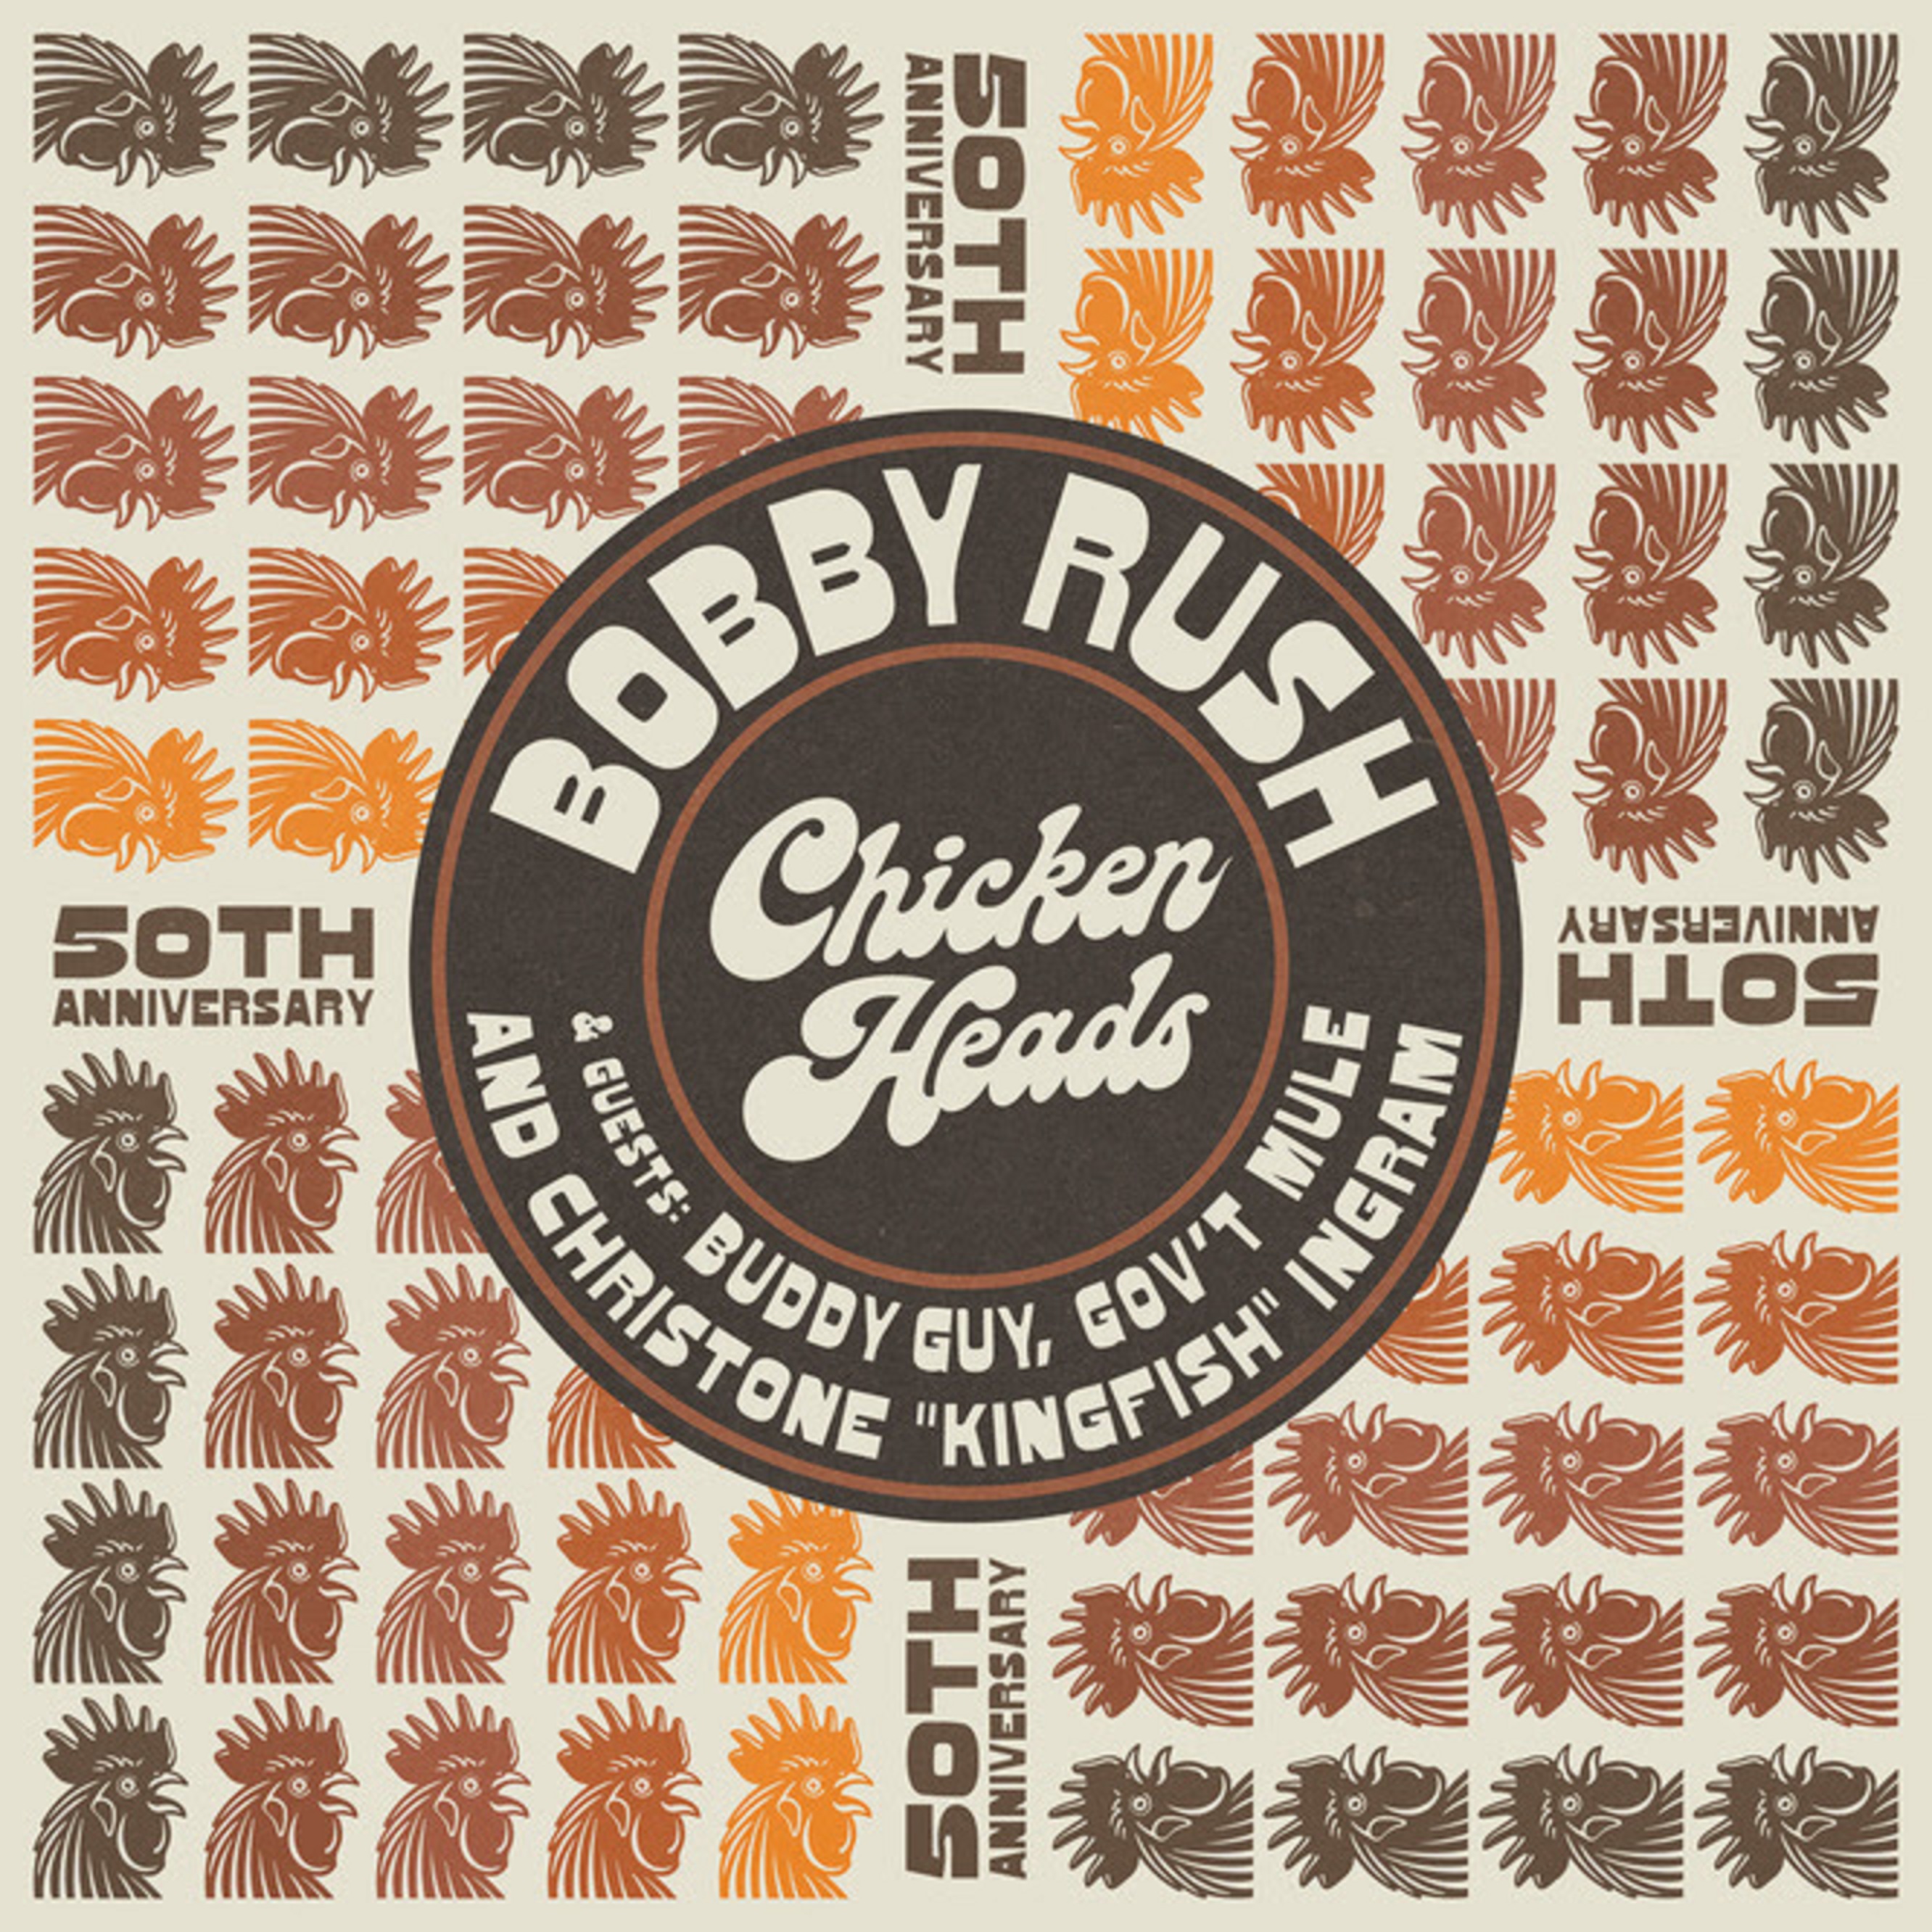 FOR THE 50th ANNIVERSARY OF BOBBY RUSH’S SONG “CHICKEN HEADS,” GRAMMY WINNER ENLISTS HELP FROM BLUES TITANS BUDDY GUY, GOV’T MULE, AND CHRISTONE “KINGFISH” INGRAM FOR VINYL EP